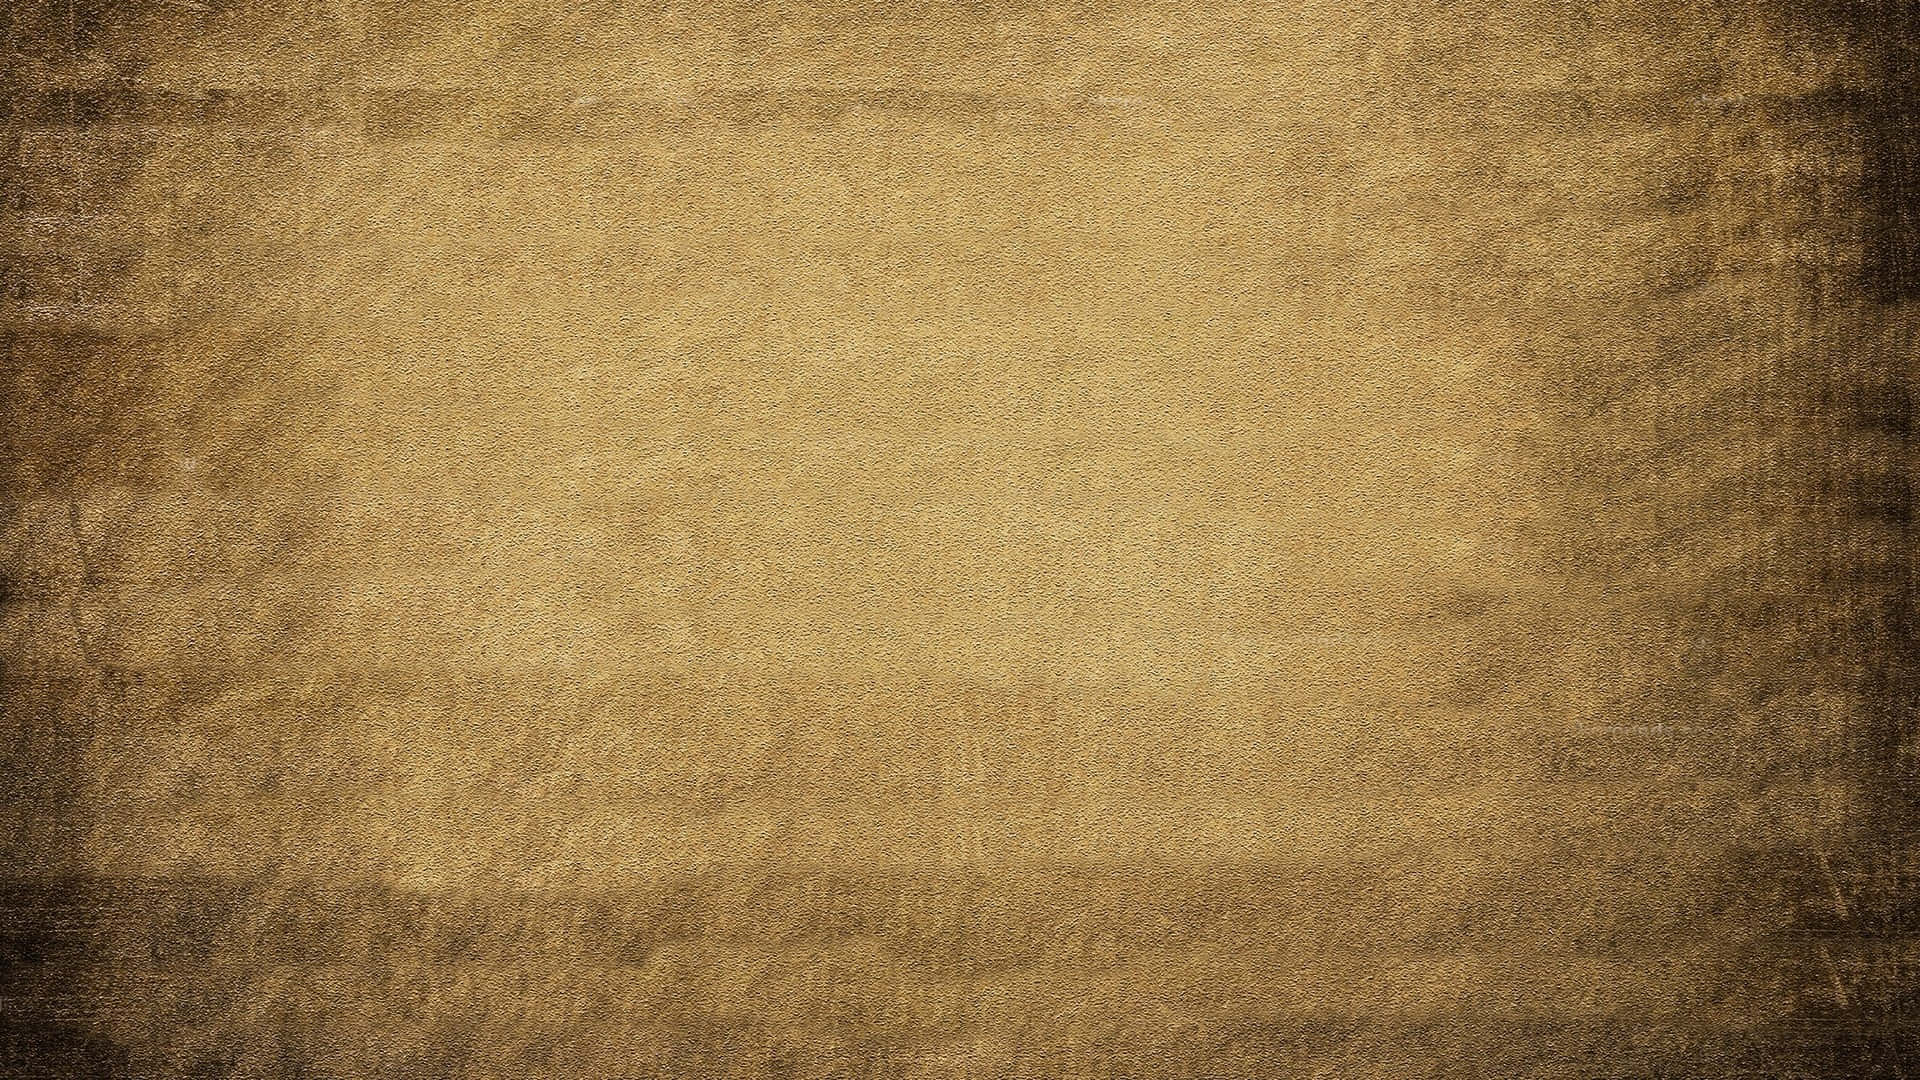 Textured Brown Paper in a Unique Pattern